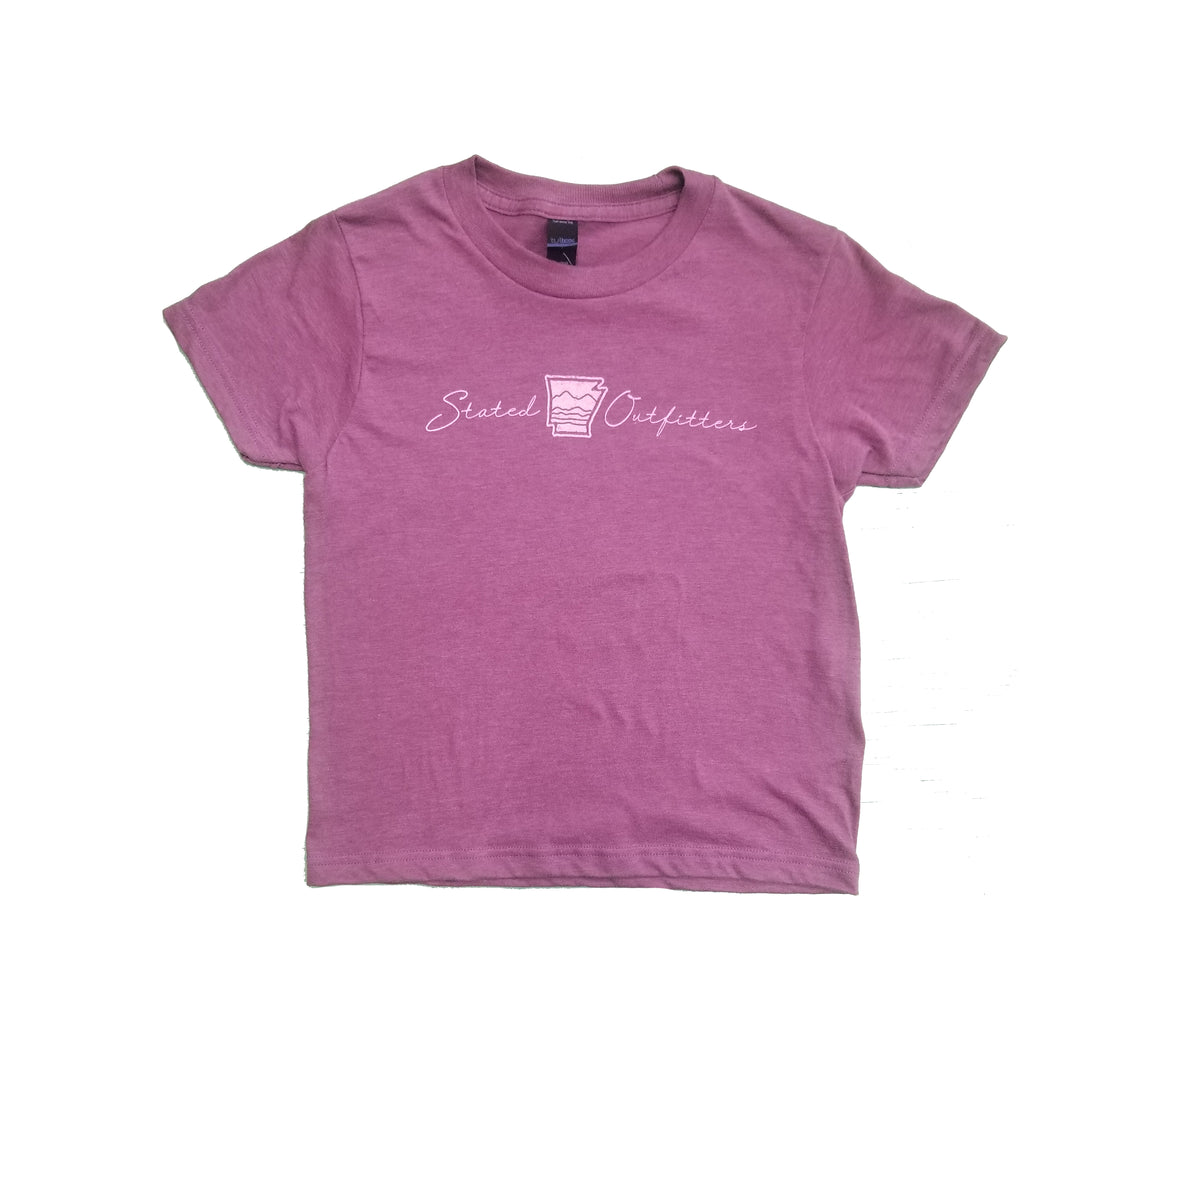 Stated Outfitters Youth Purple/ Cream Tee